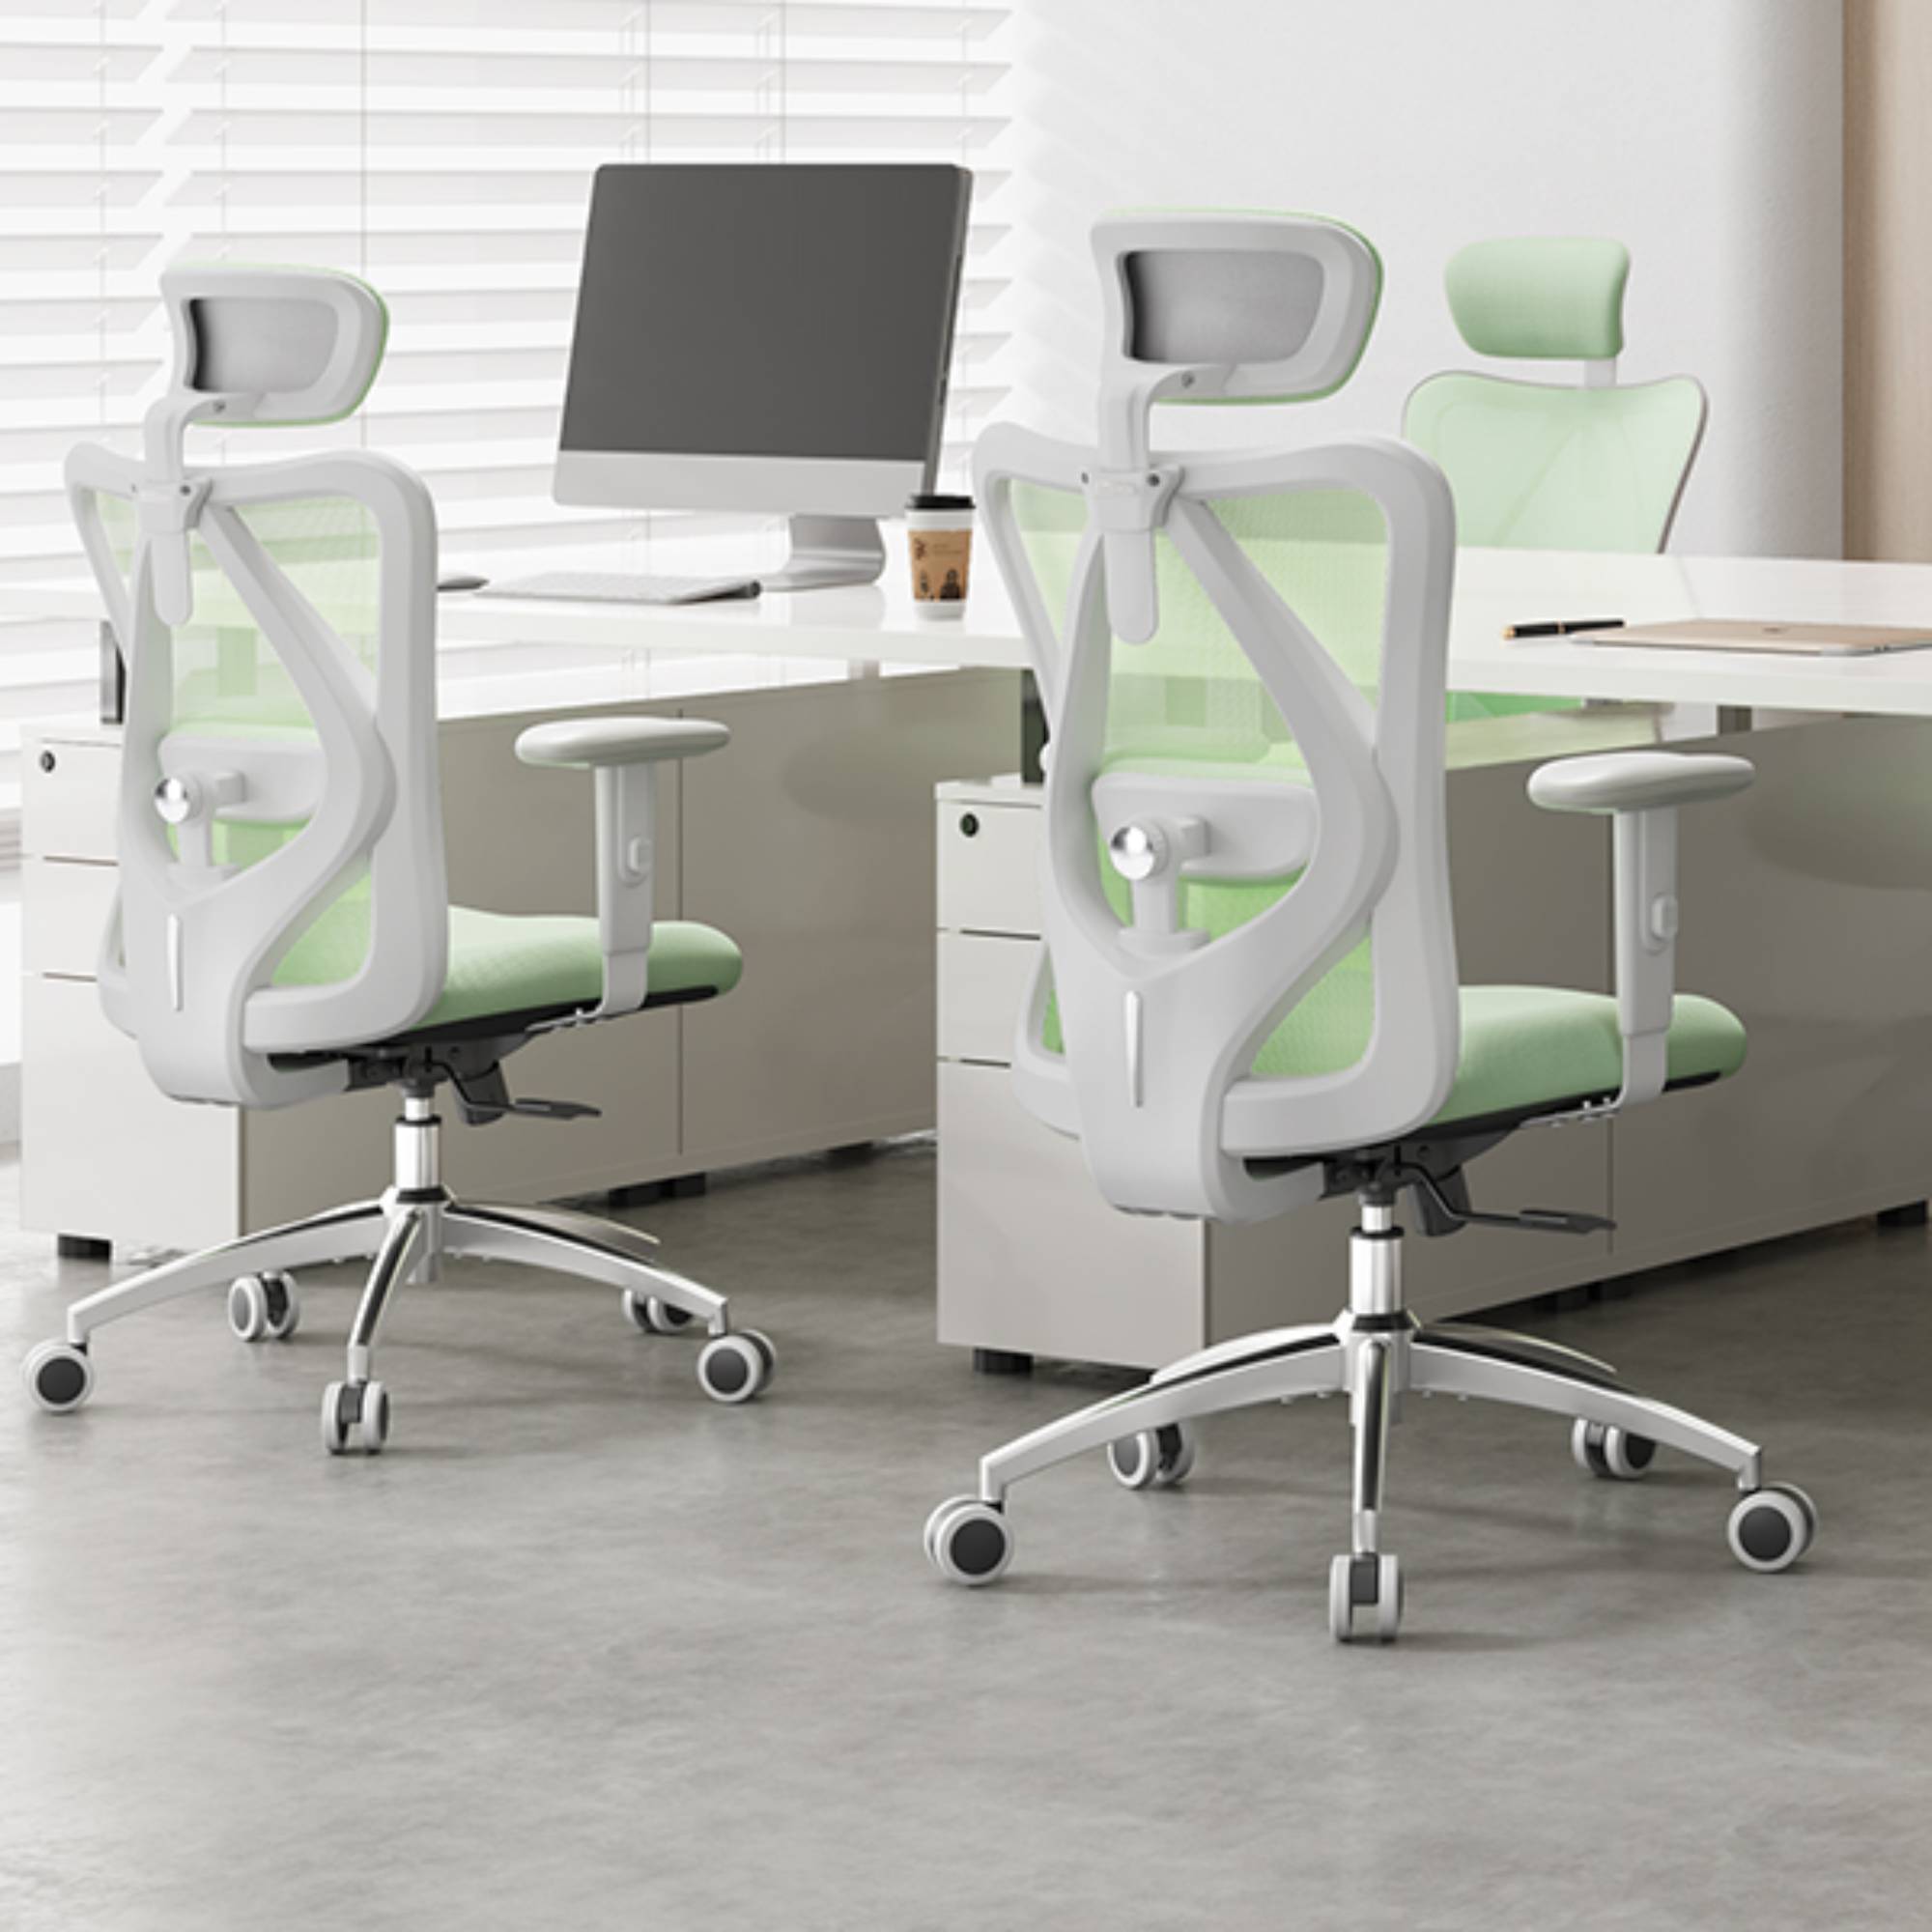 SIHOO Ergonomic Office Chair, Mesh Computer Desk Chair with Adjustable Lumbar Support, High Back chair for Big and Tall, White and Green - image 4 of 11